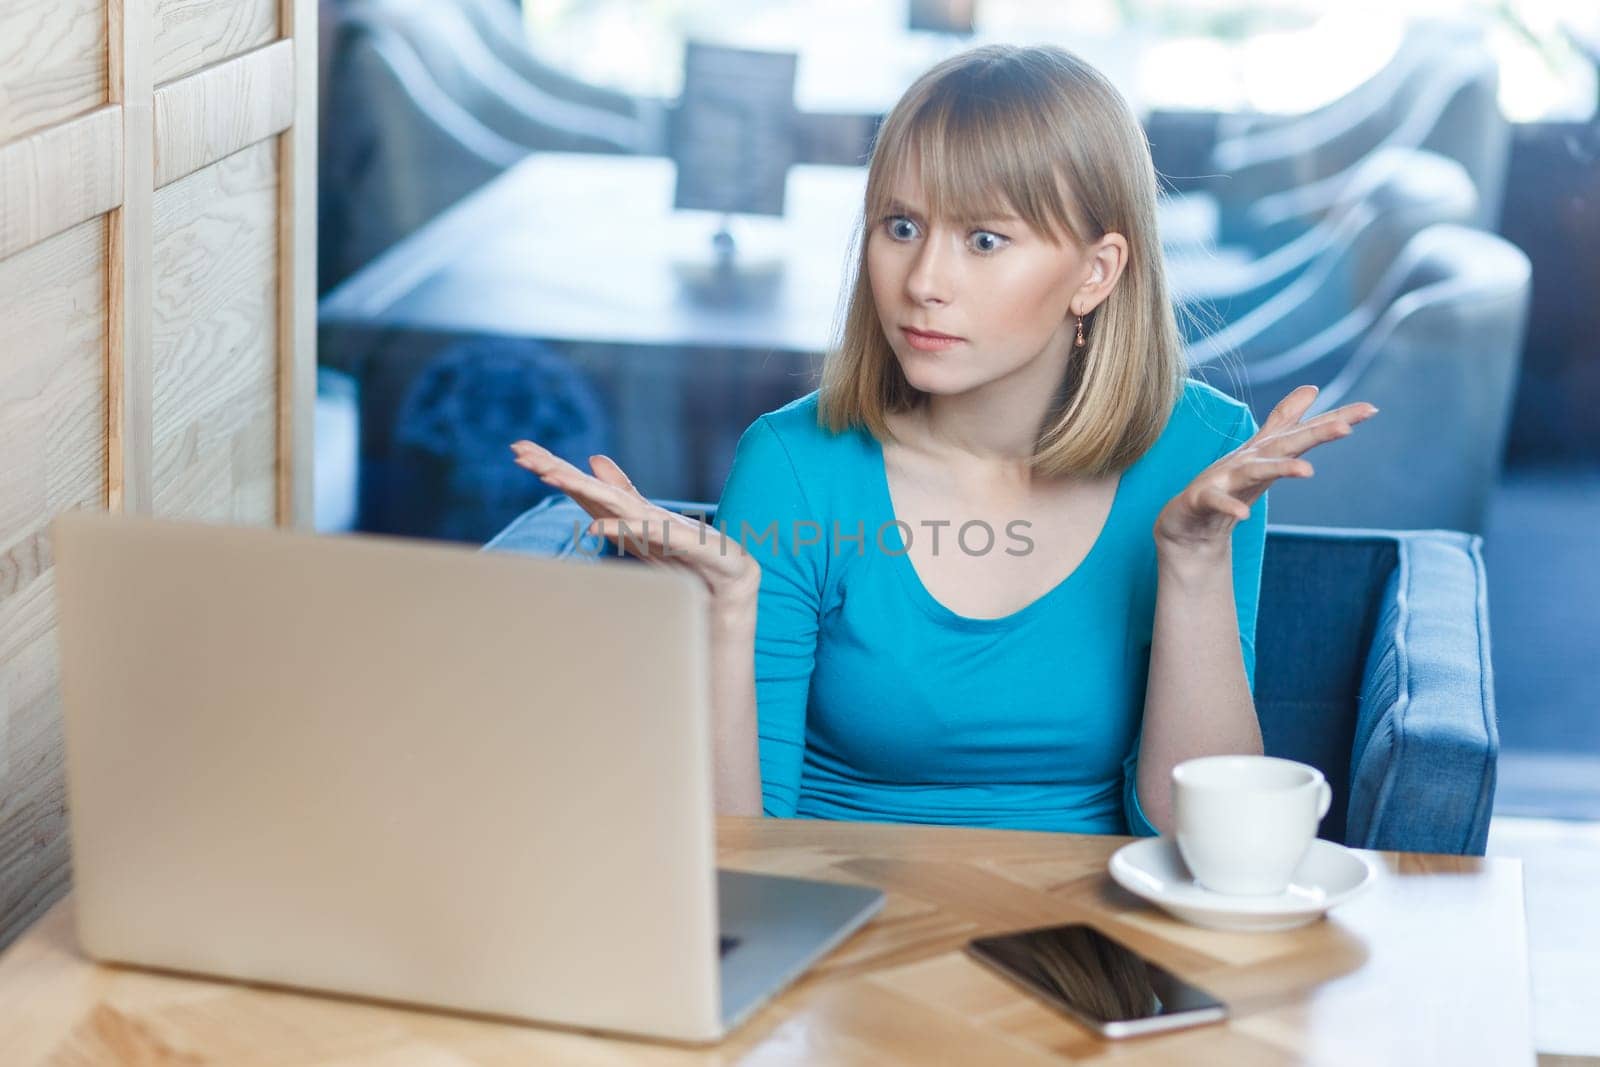 Portrait of unhappy serious attractive young woman with blonde hair in blue shirt working on laptop, having video call, spreads hands, asking how could you. Indoor shot, cafe background.